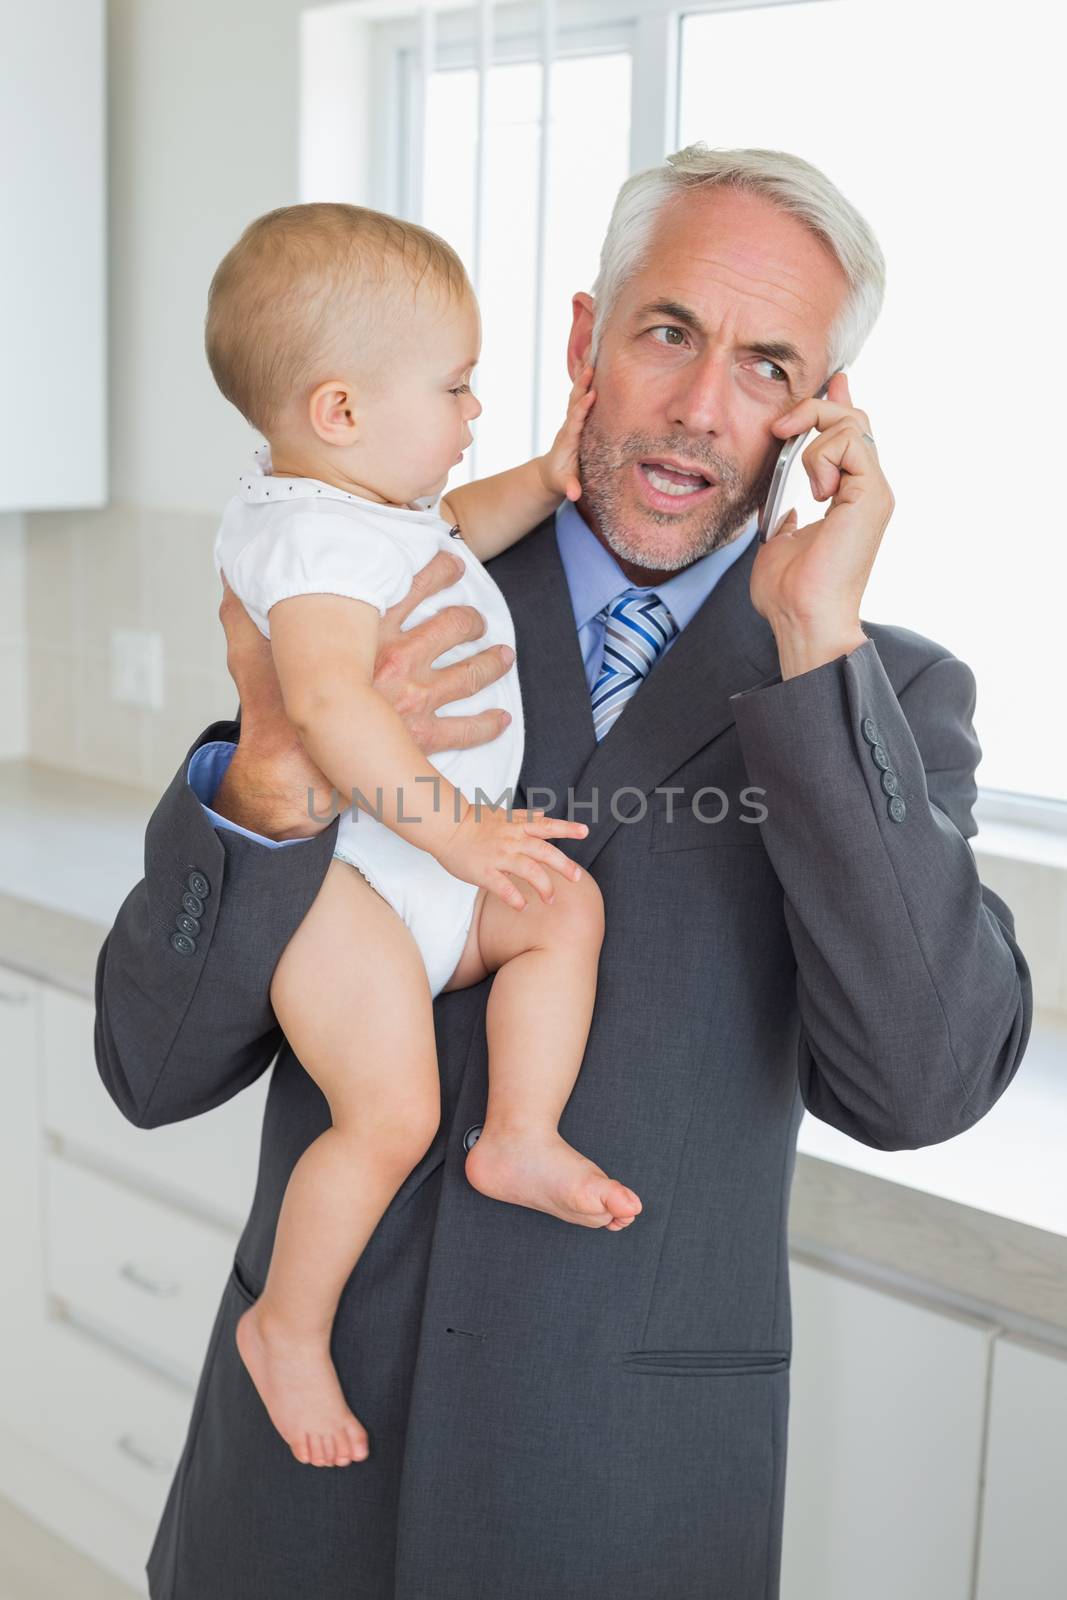 Distracted businessman holding his baby in the morning before work by Wavebreakmedia